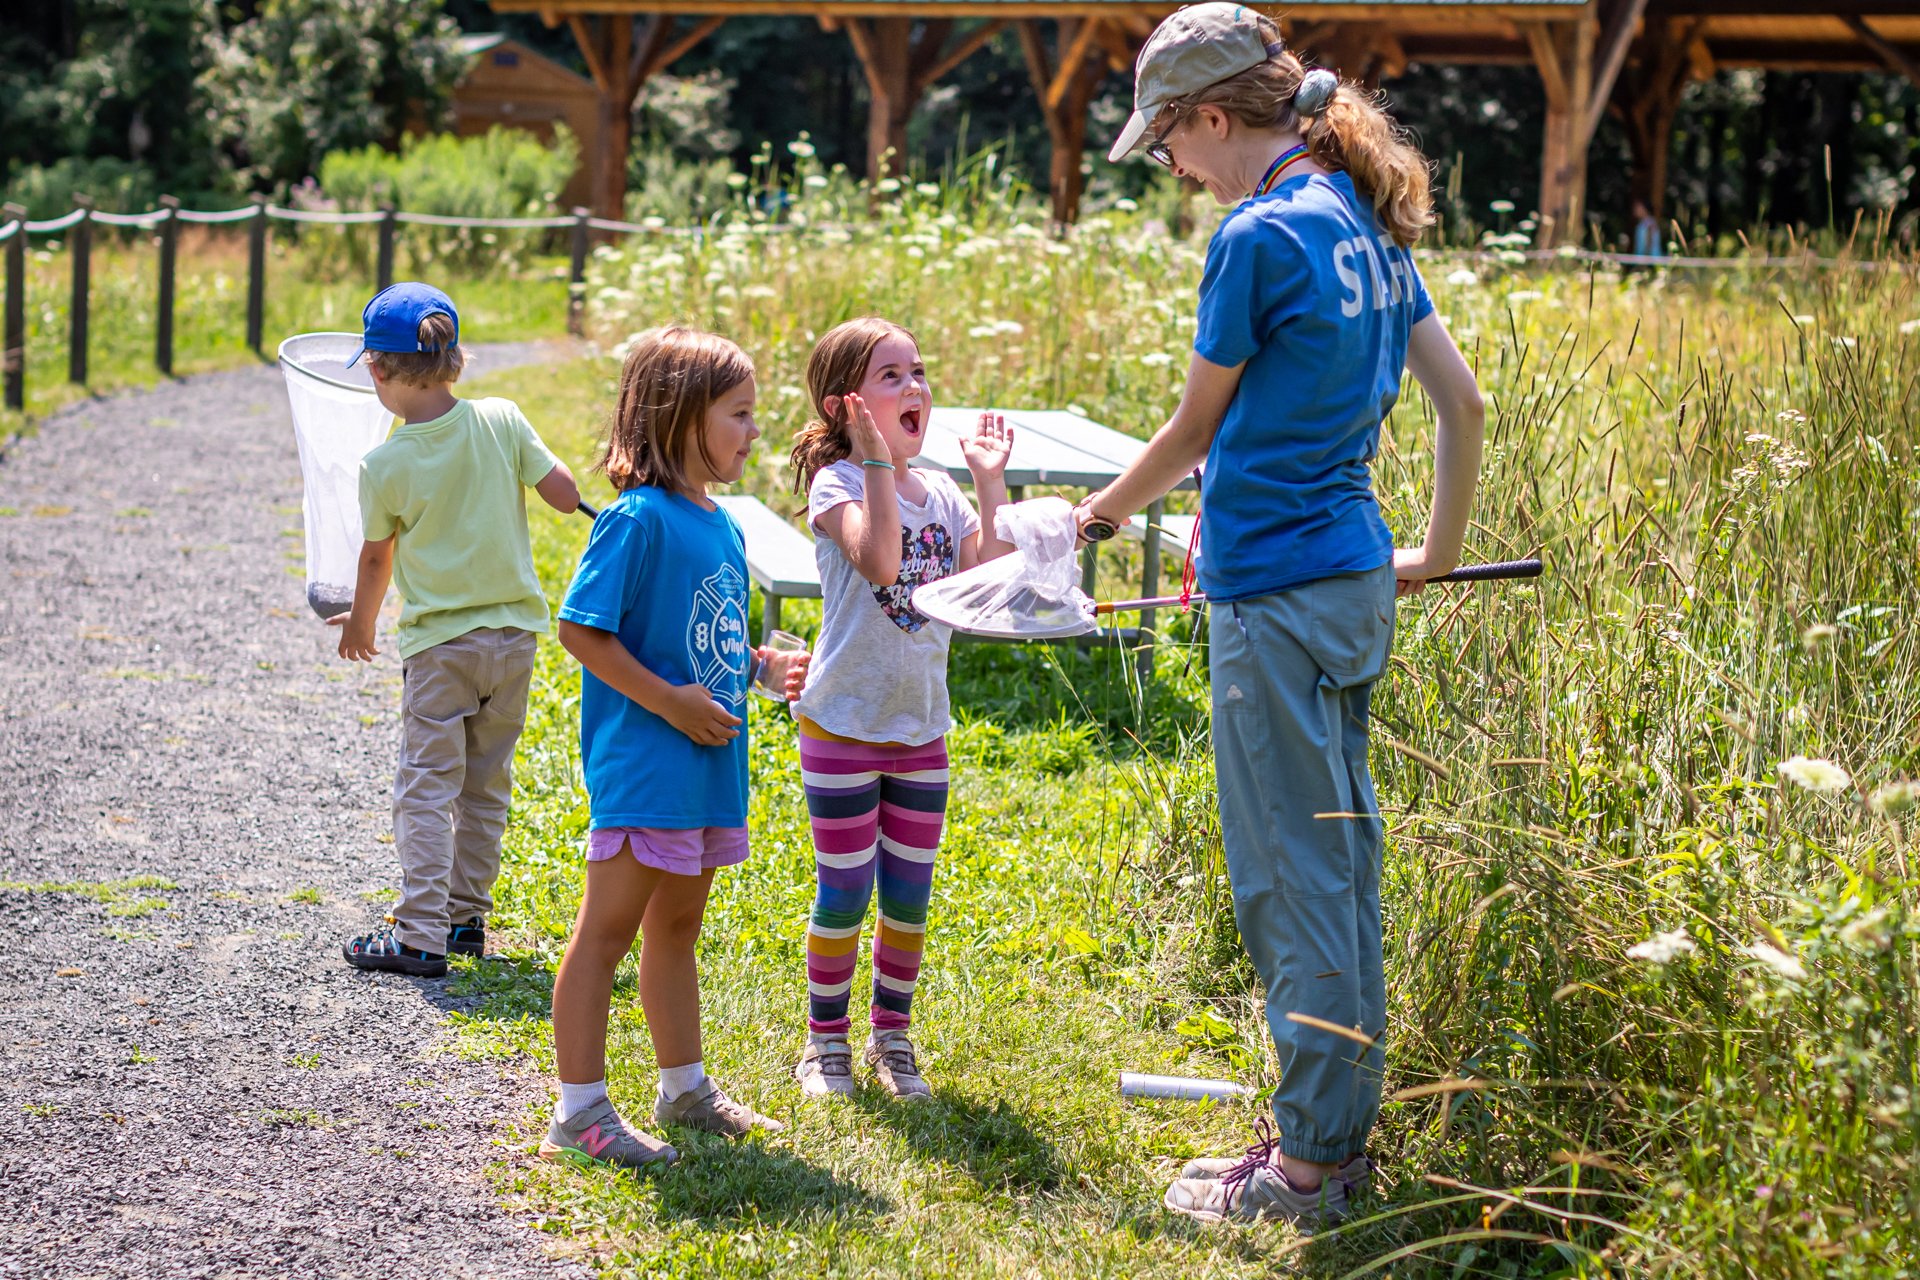 Campers at Arcadia Nature Camp exclaiming with delight at a specimen in a bug net held by a counselor